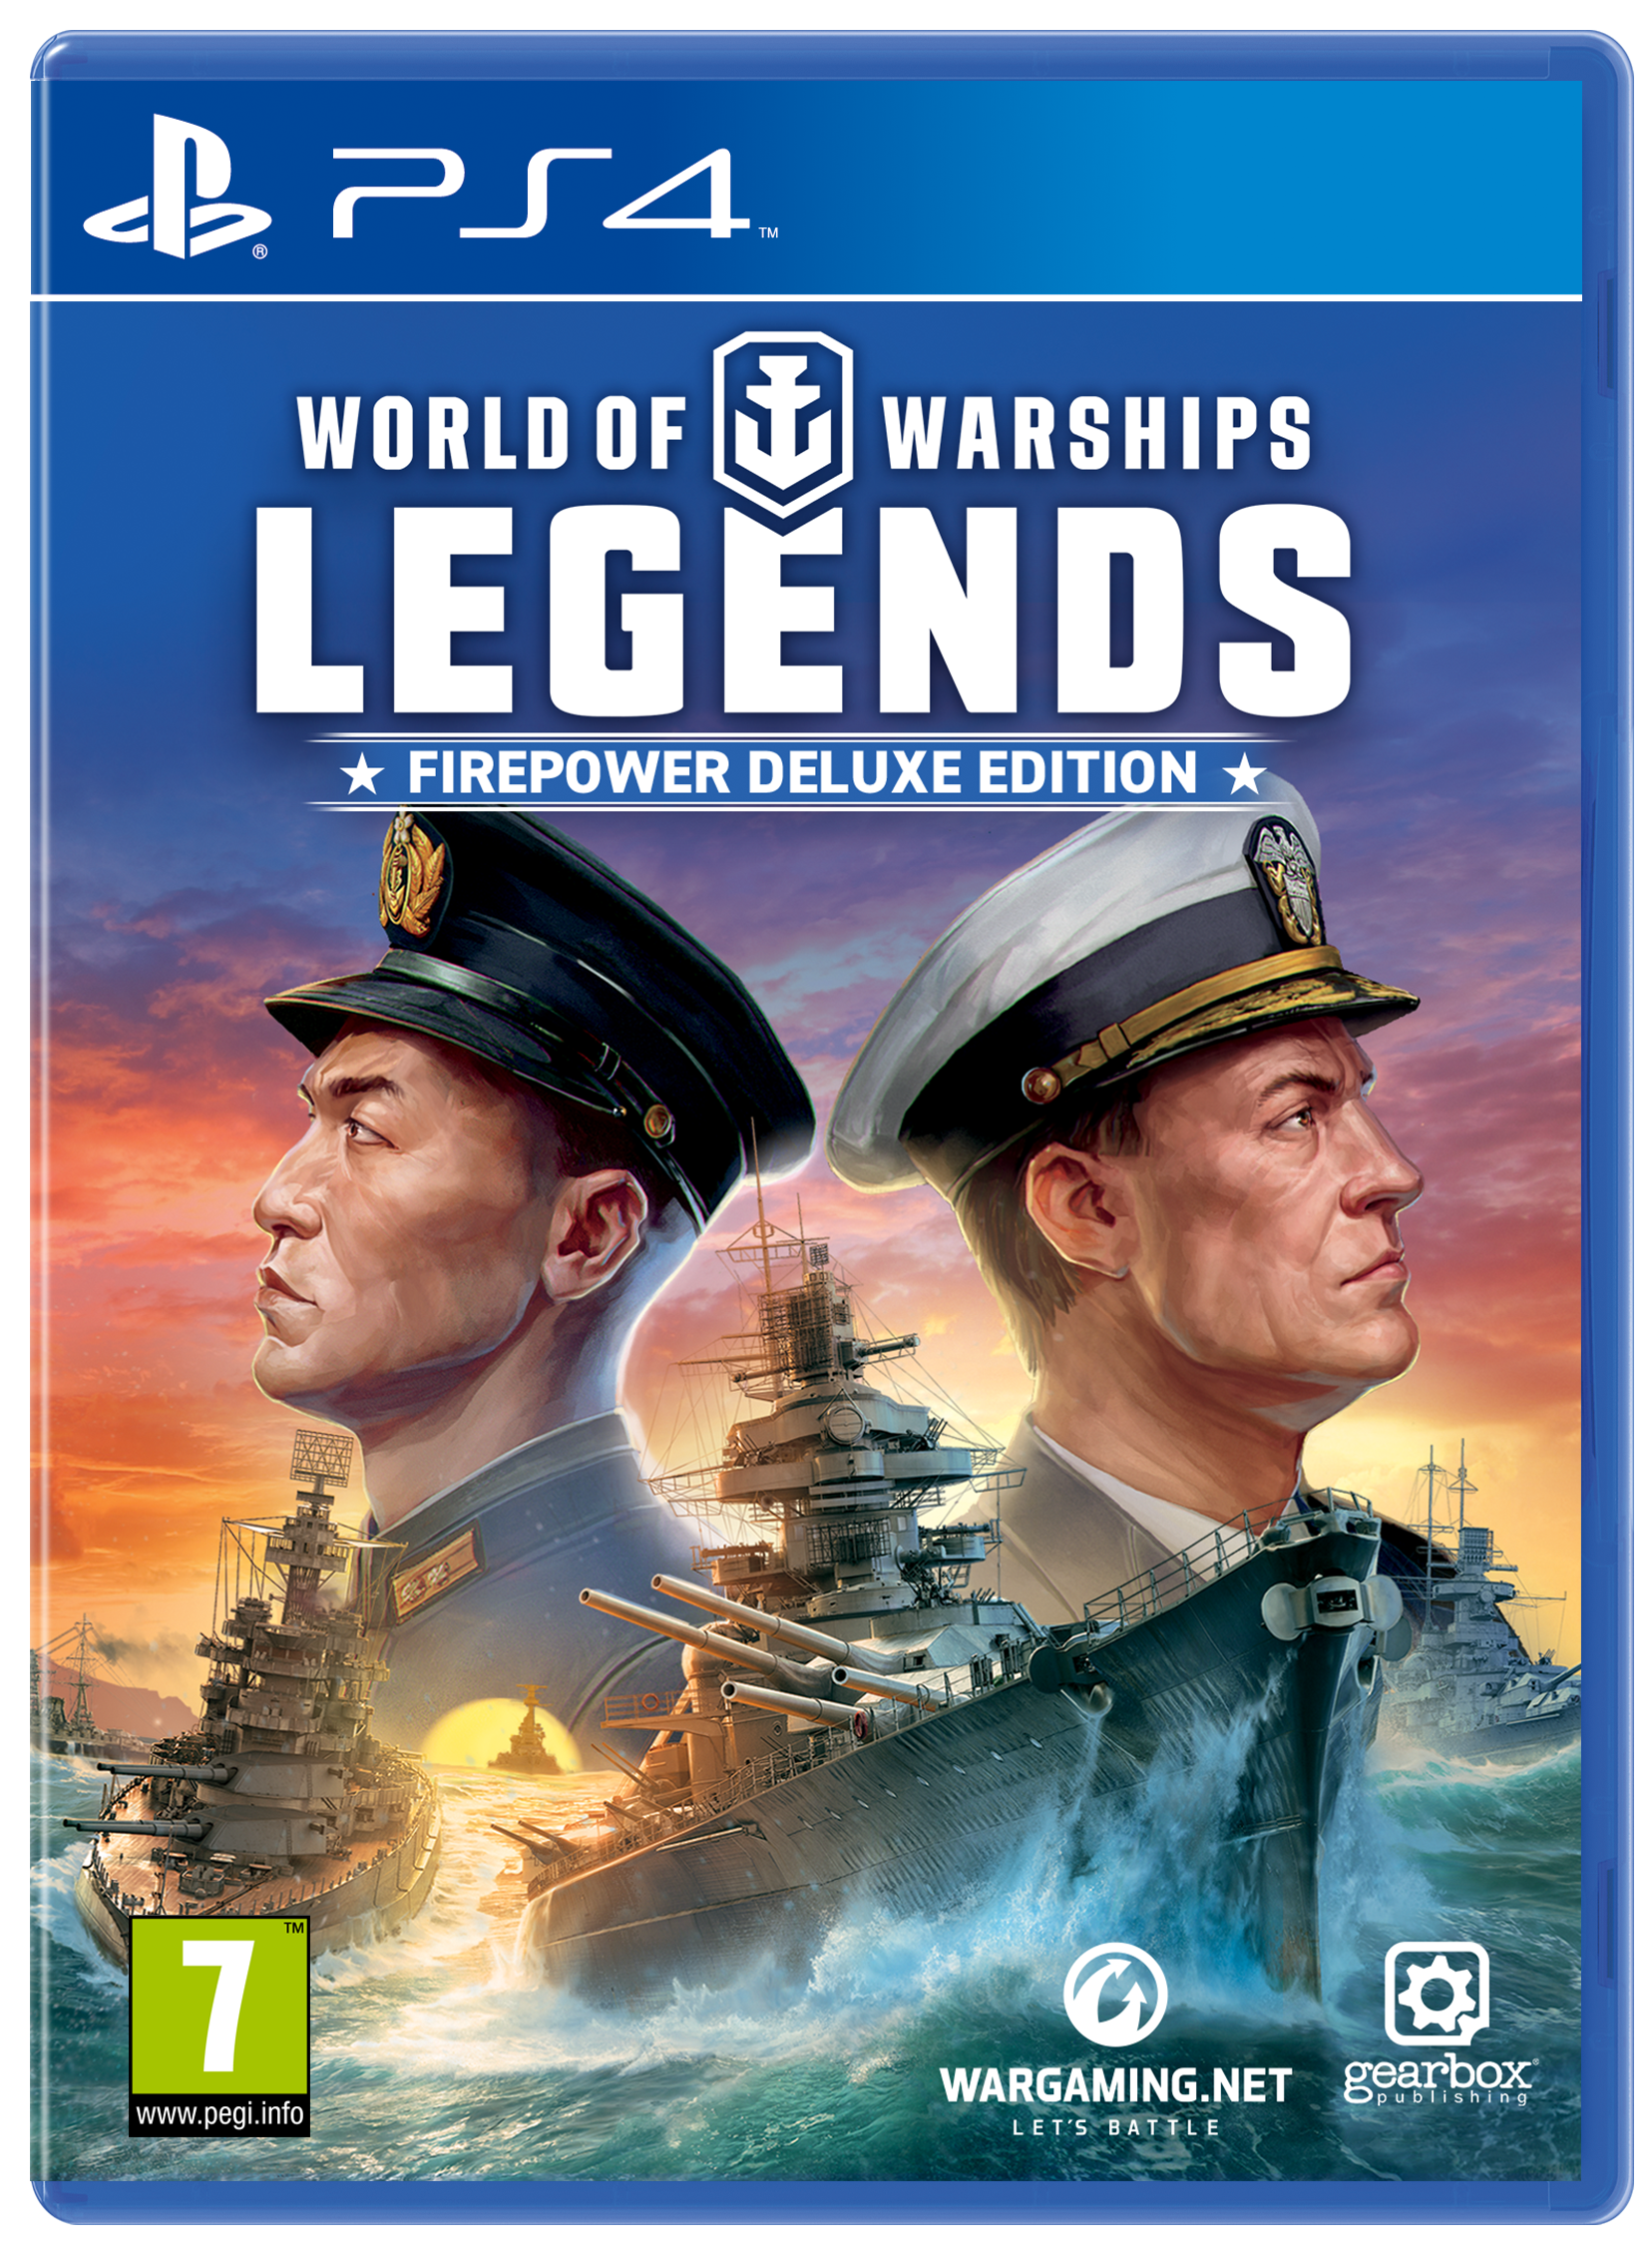 world of warships: legends ps4 tips and tricks